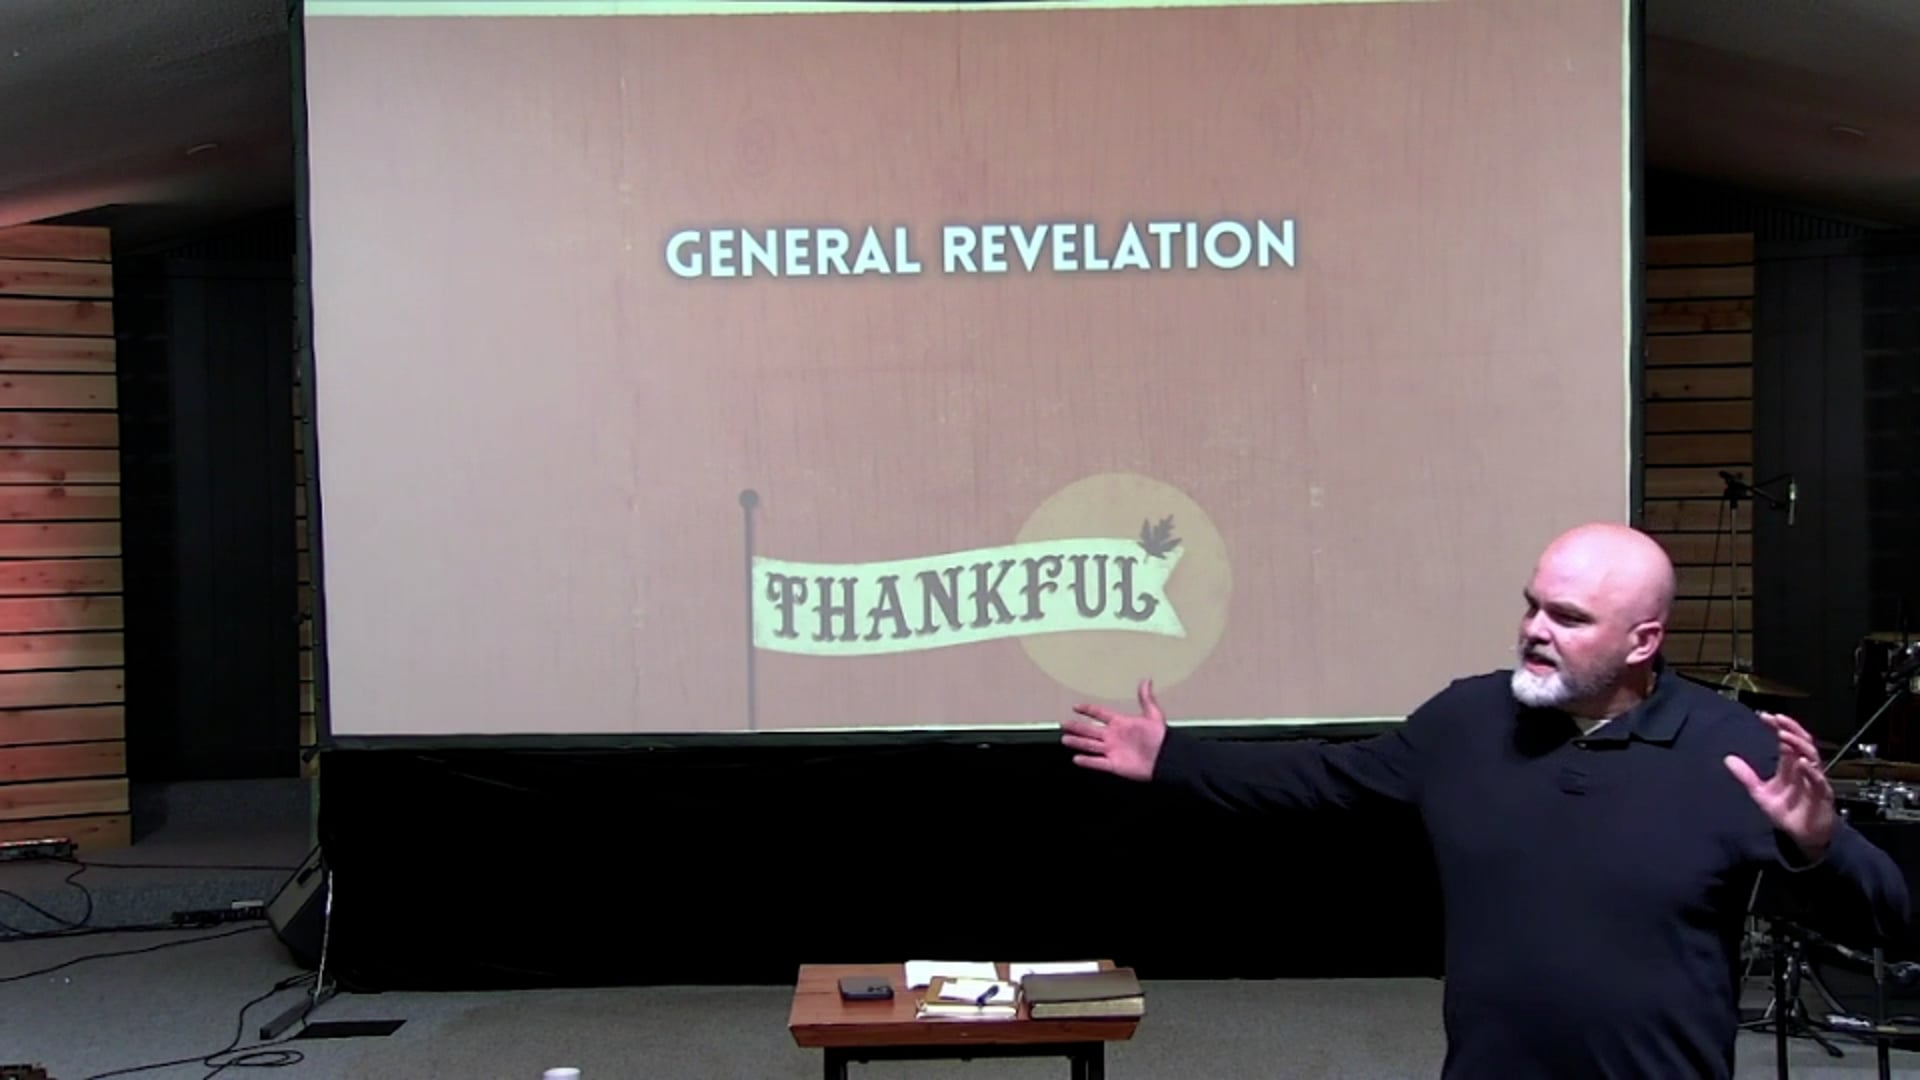 Thankful … For the Scriptures?